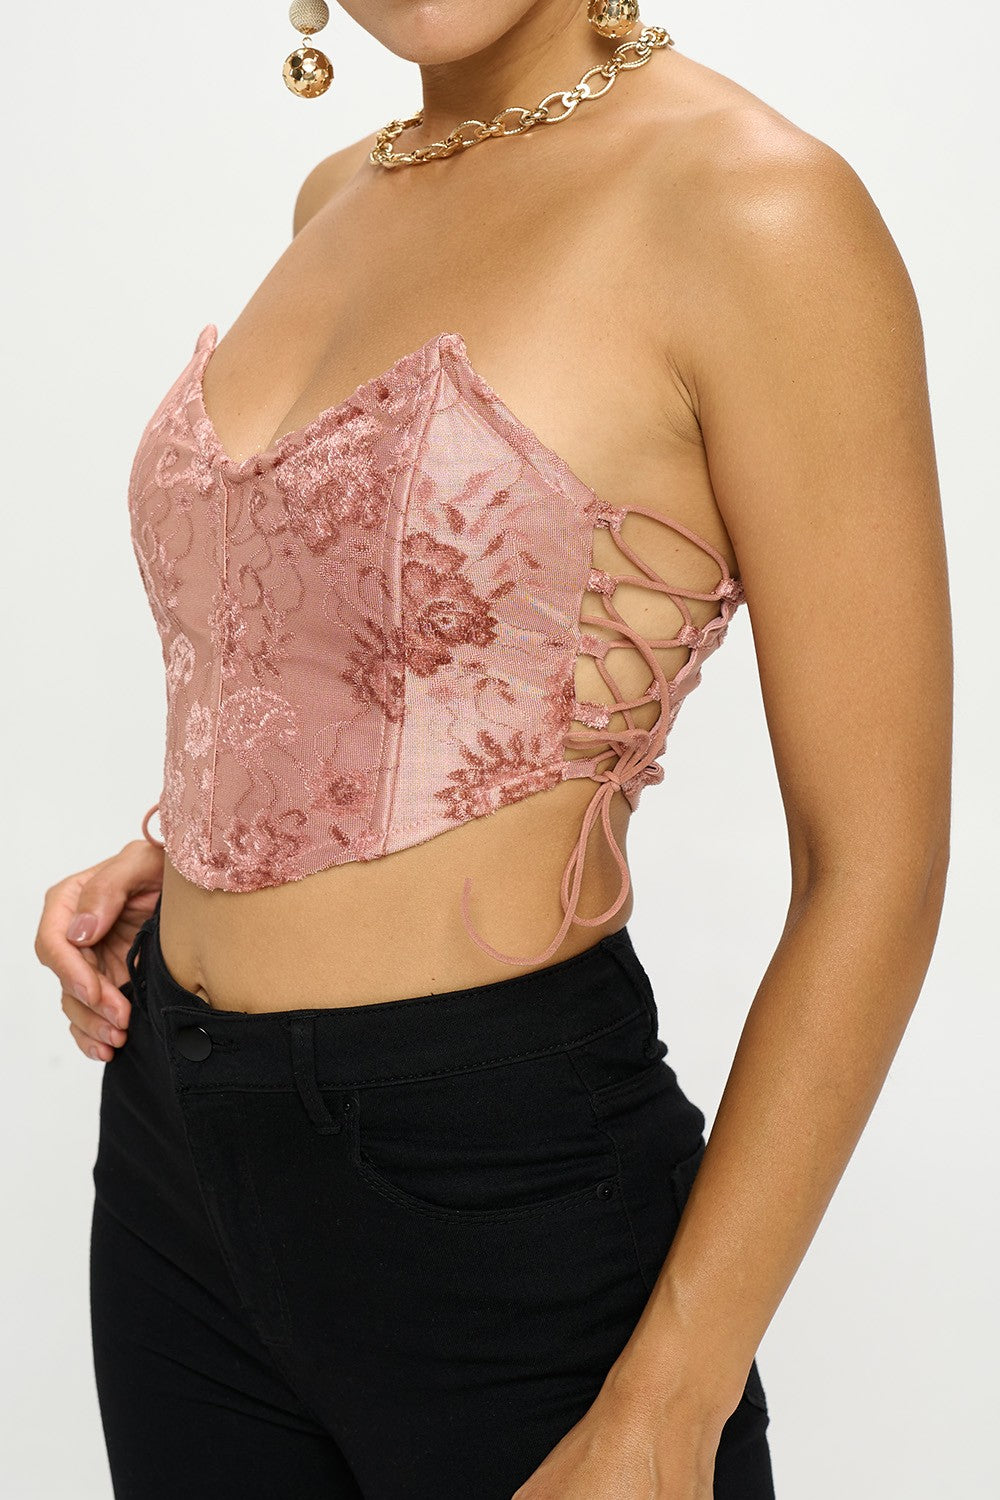 VELVET STRAPLESS SIDE LACE UP CORSET TOP